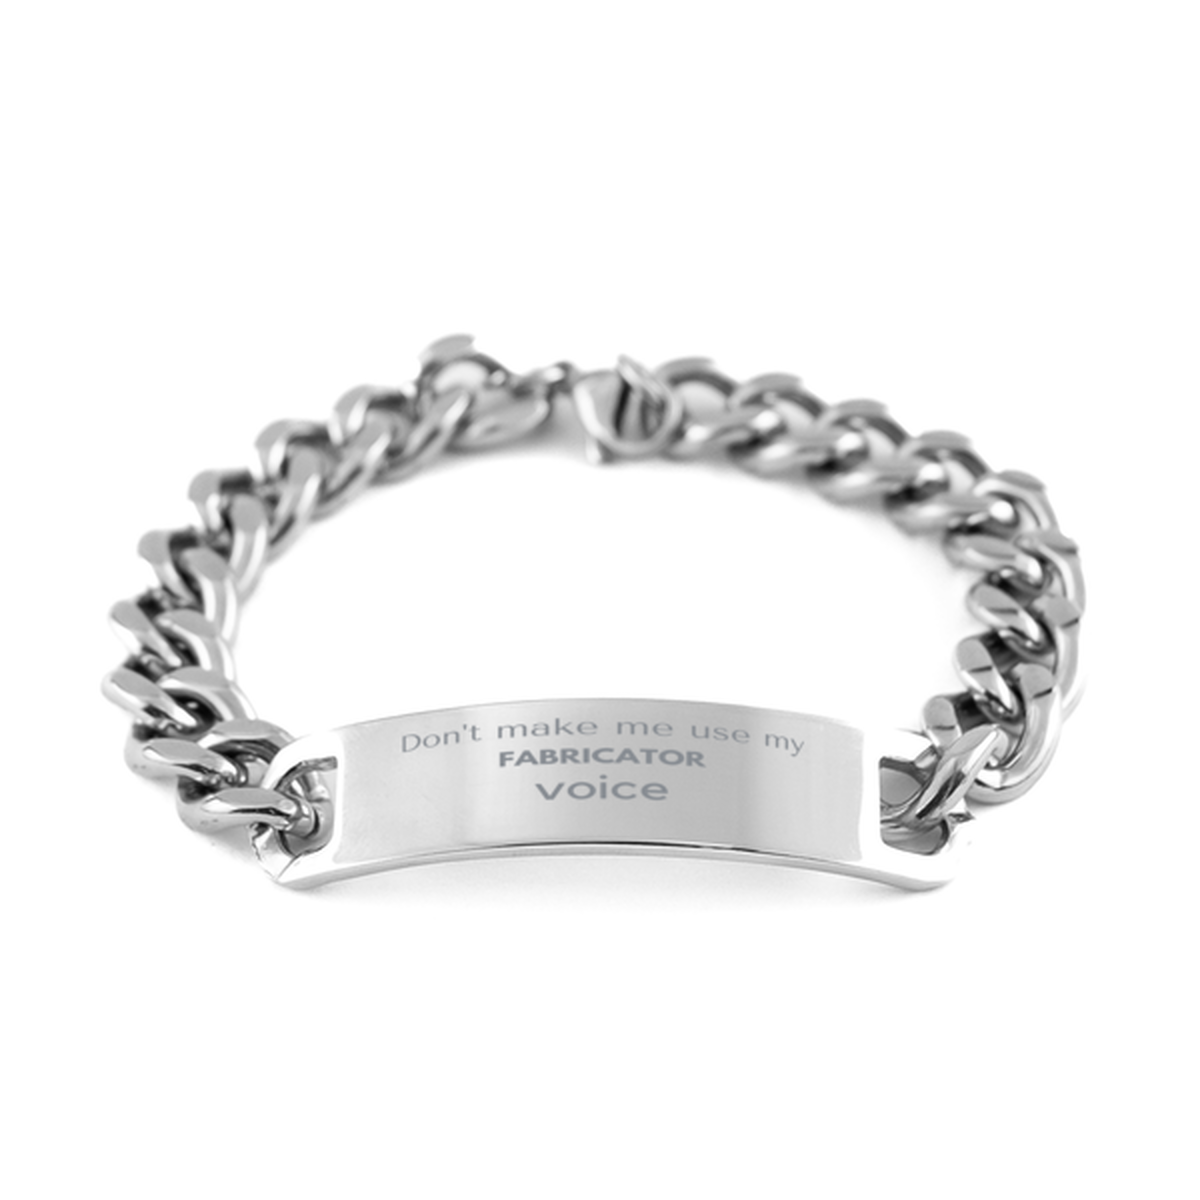 Don't make me use my Fabricator voice, Sarcasm Fabricator Gifts, Christmas Fabricator Cuban Chain Stainless Steel Bracelet Birthday Unique Gifts For Fabricator Coworkers, Men, Women, Colleague, Friends